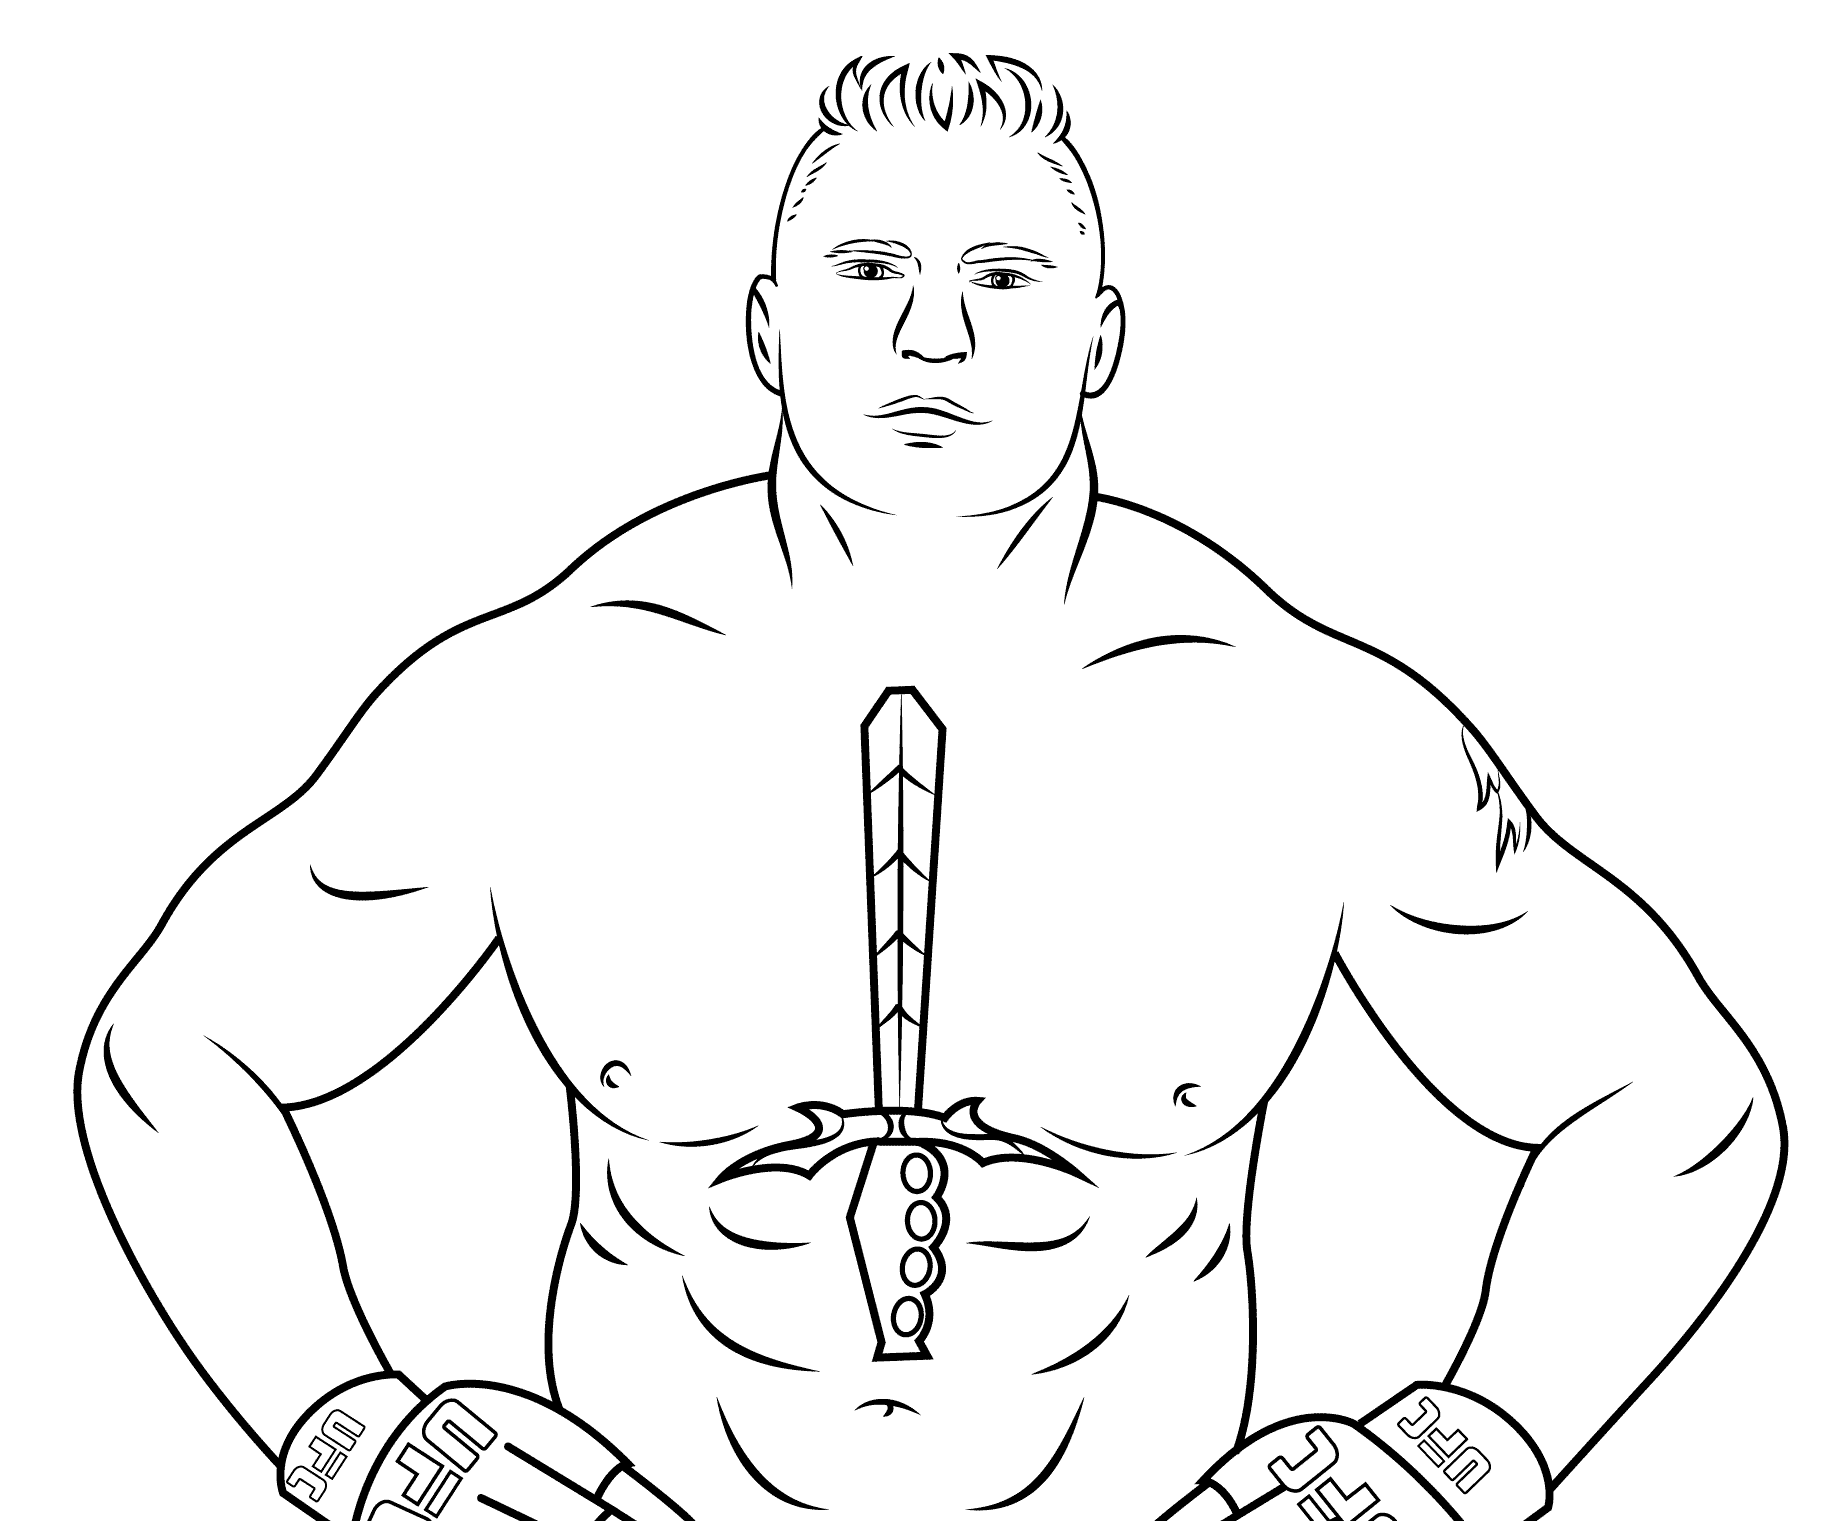 blessing spear Medic Dave Bautista WWE Coloring Pages - WWE Coloring Pages - Coloring Pages For  Kids And Adults